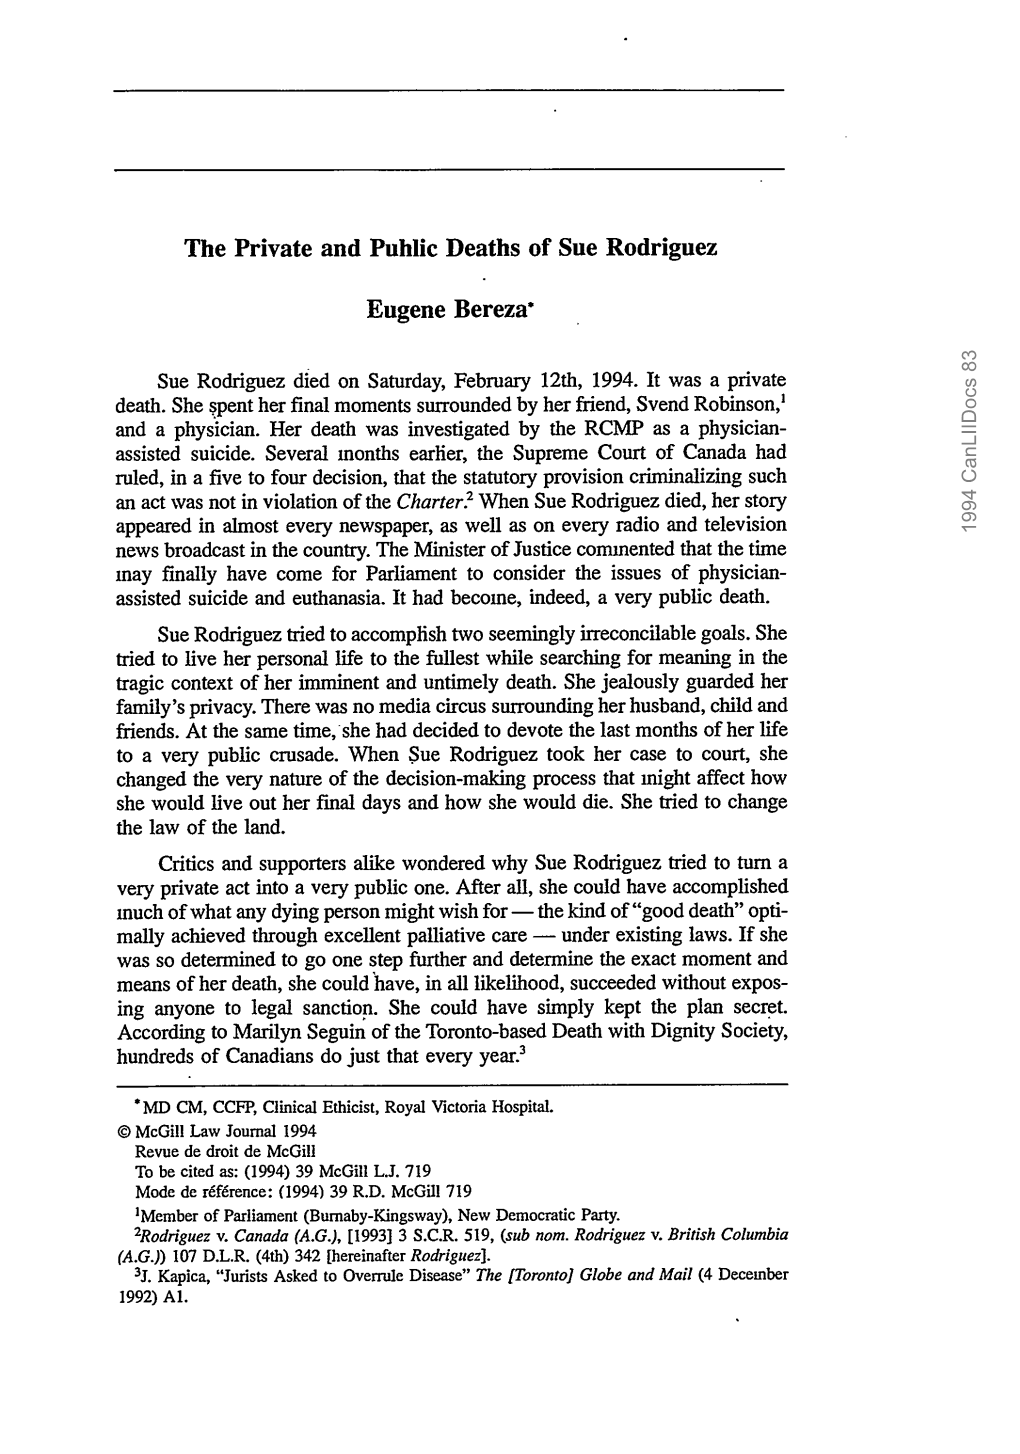 The Private and Public Deaths of Sue Rodriguez Eugene Bereza*